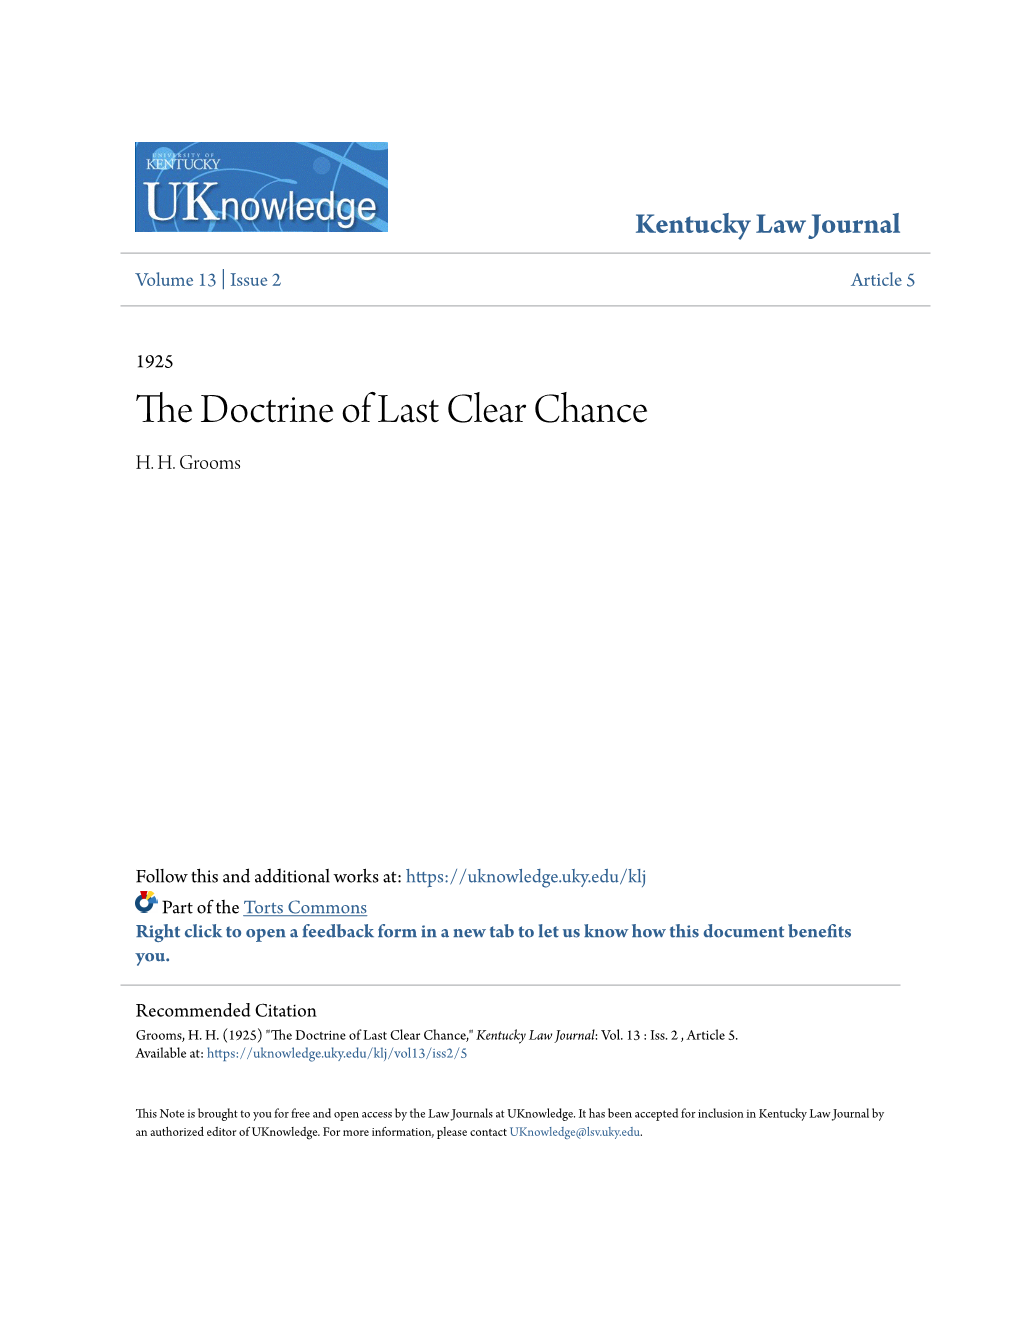 The Doctrine of Last Clear Chance